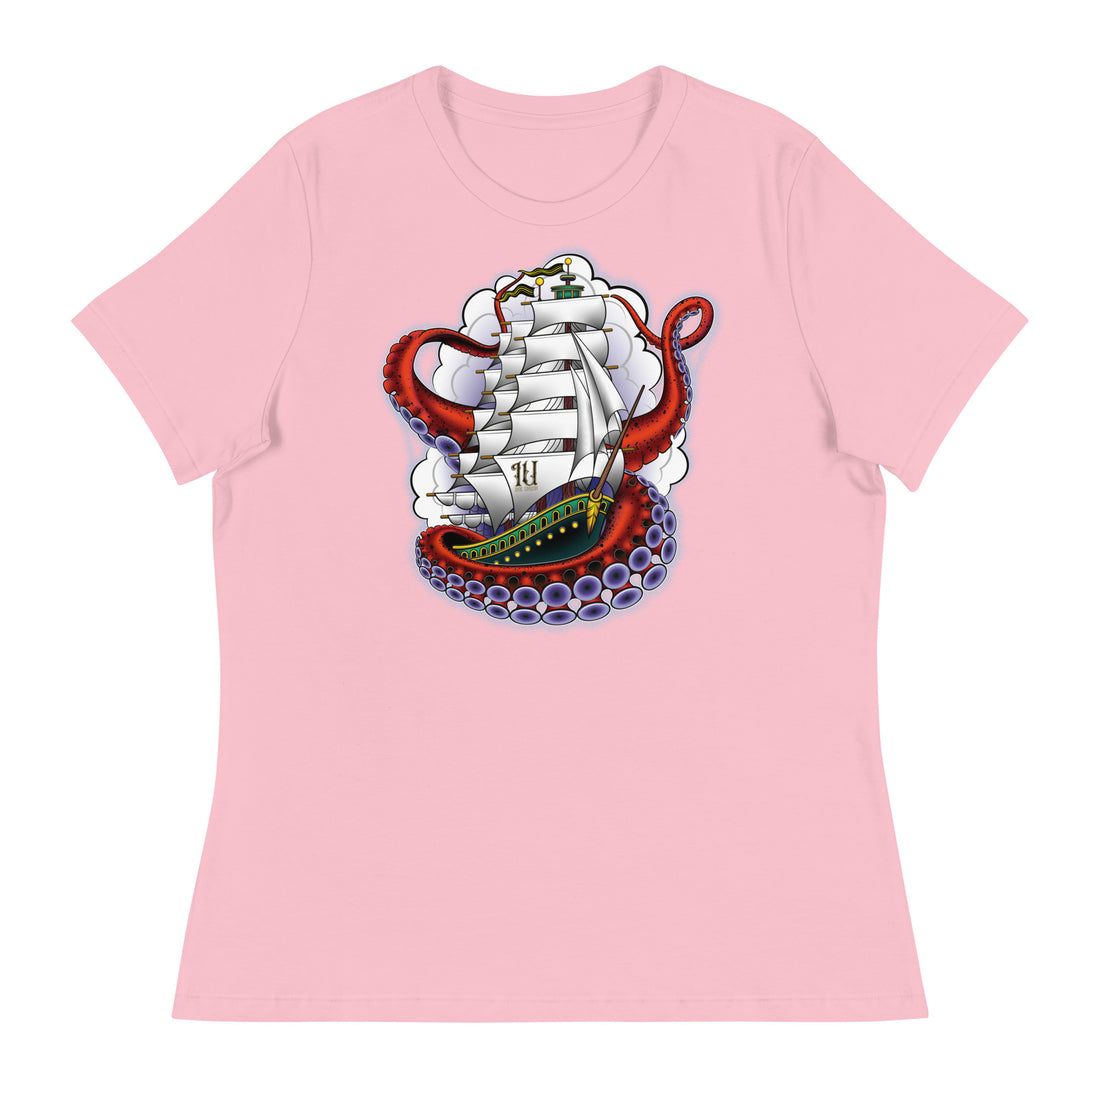 A light pink t-shirt with an old-school clipper ship tattoo design in green and brown with white sails surrounded by octopus tentacles in shades of red with purple tentacles. Behind the ship are purple-tinged clouds.